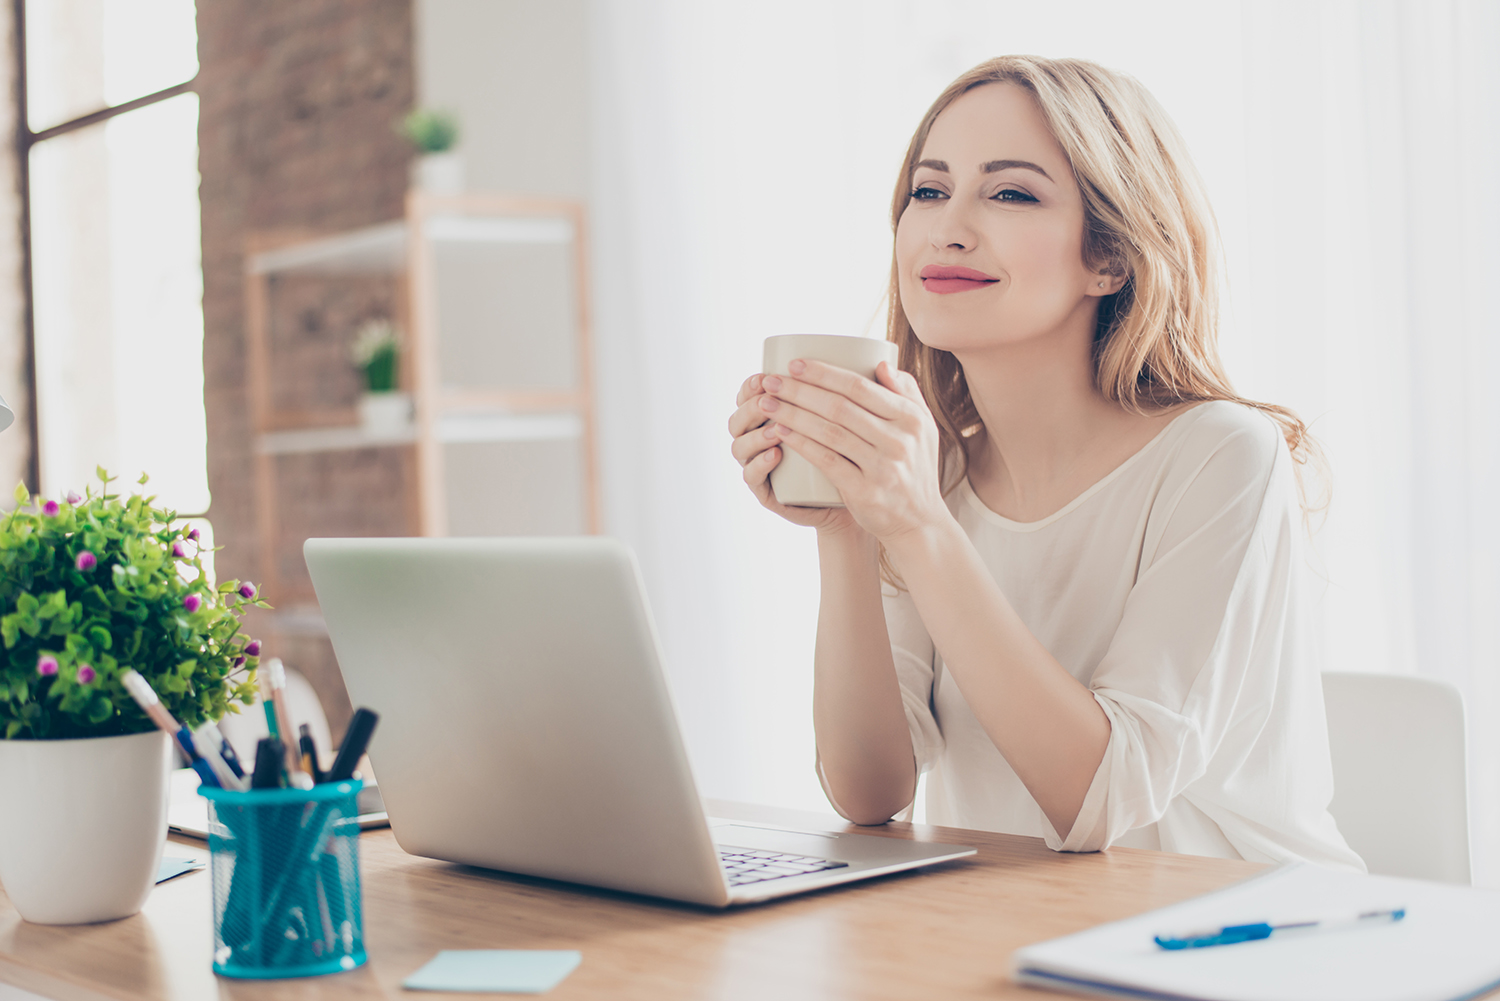 A content woman at her desk, in front of her laptop, and enjoying a hot beverage